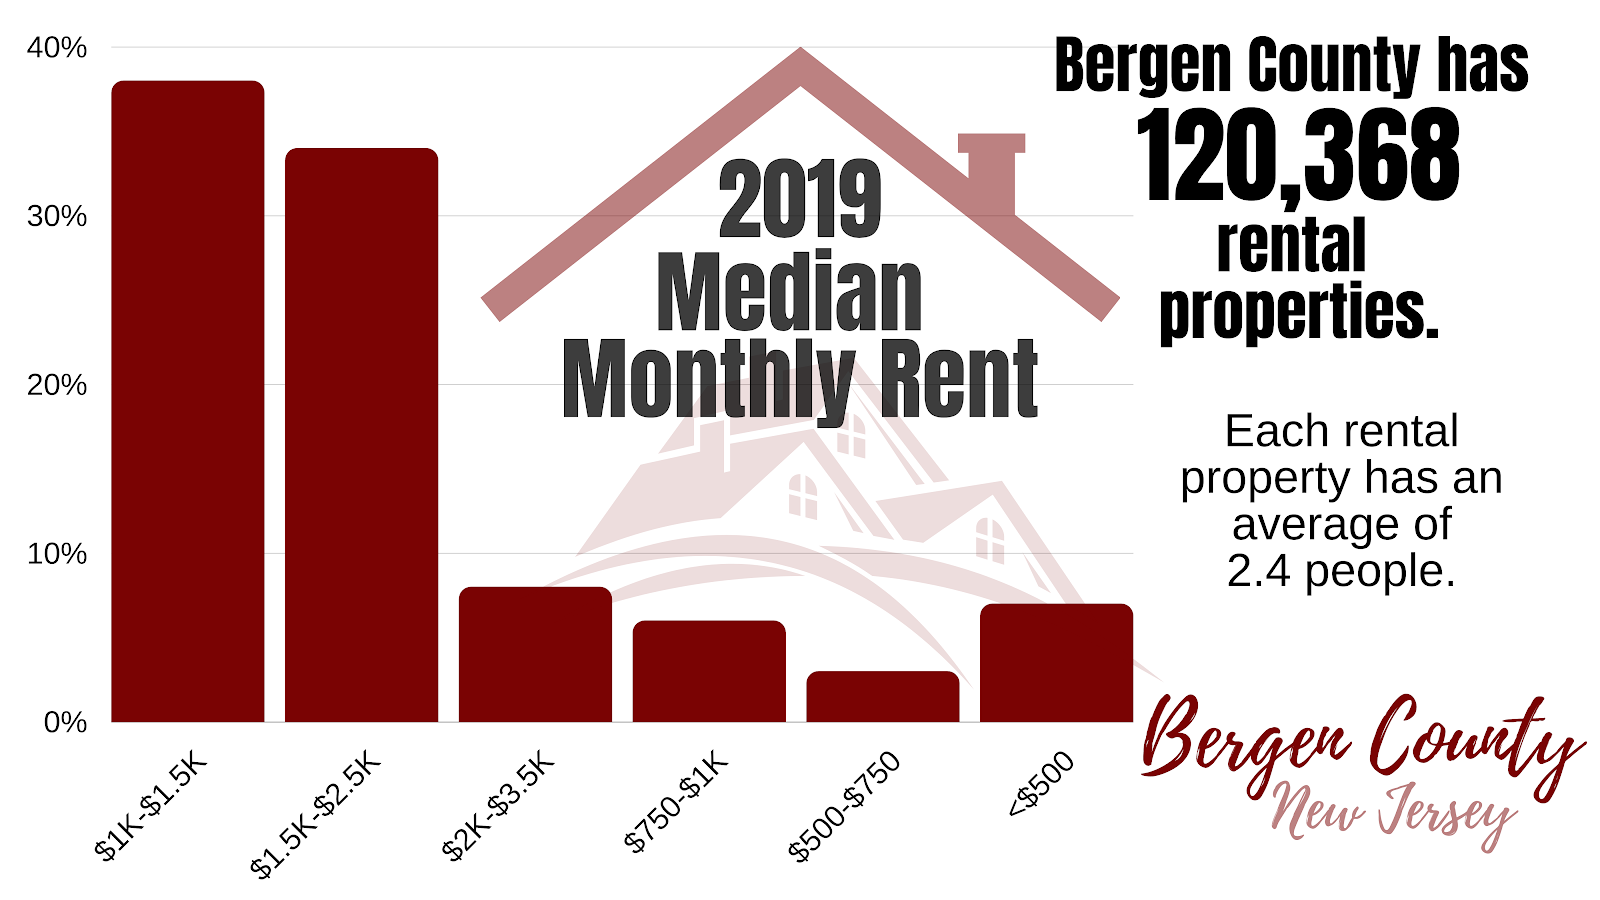 Rental Property Data for Bergen County